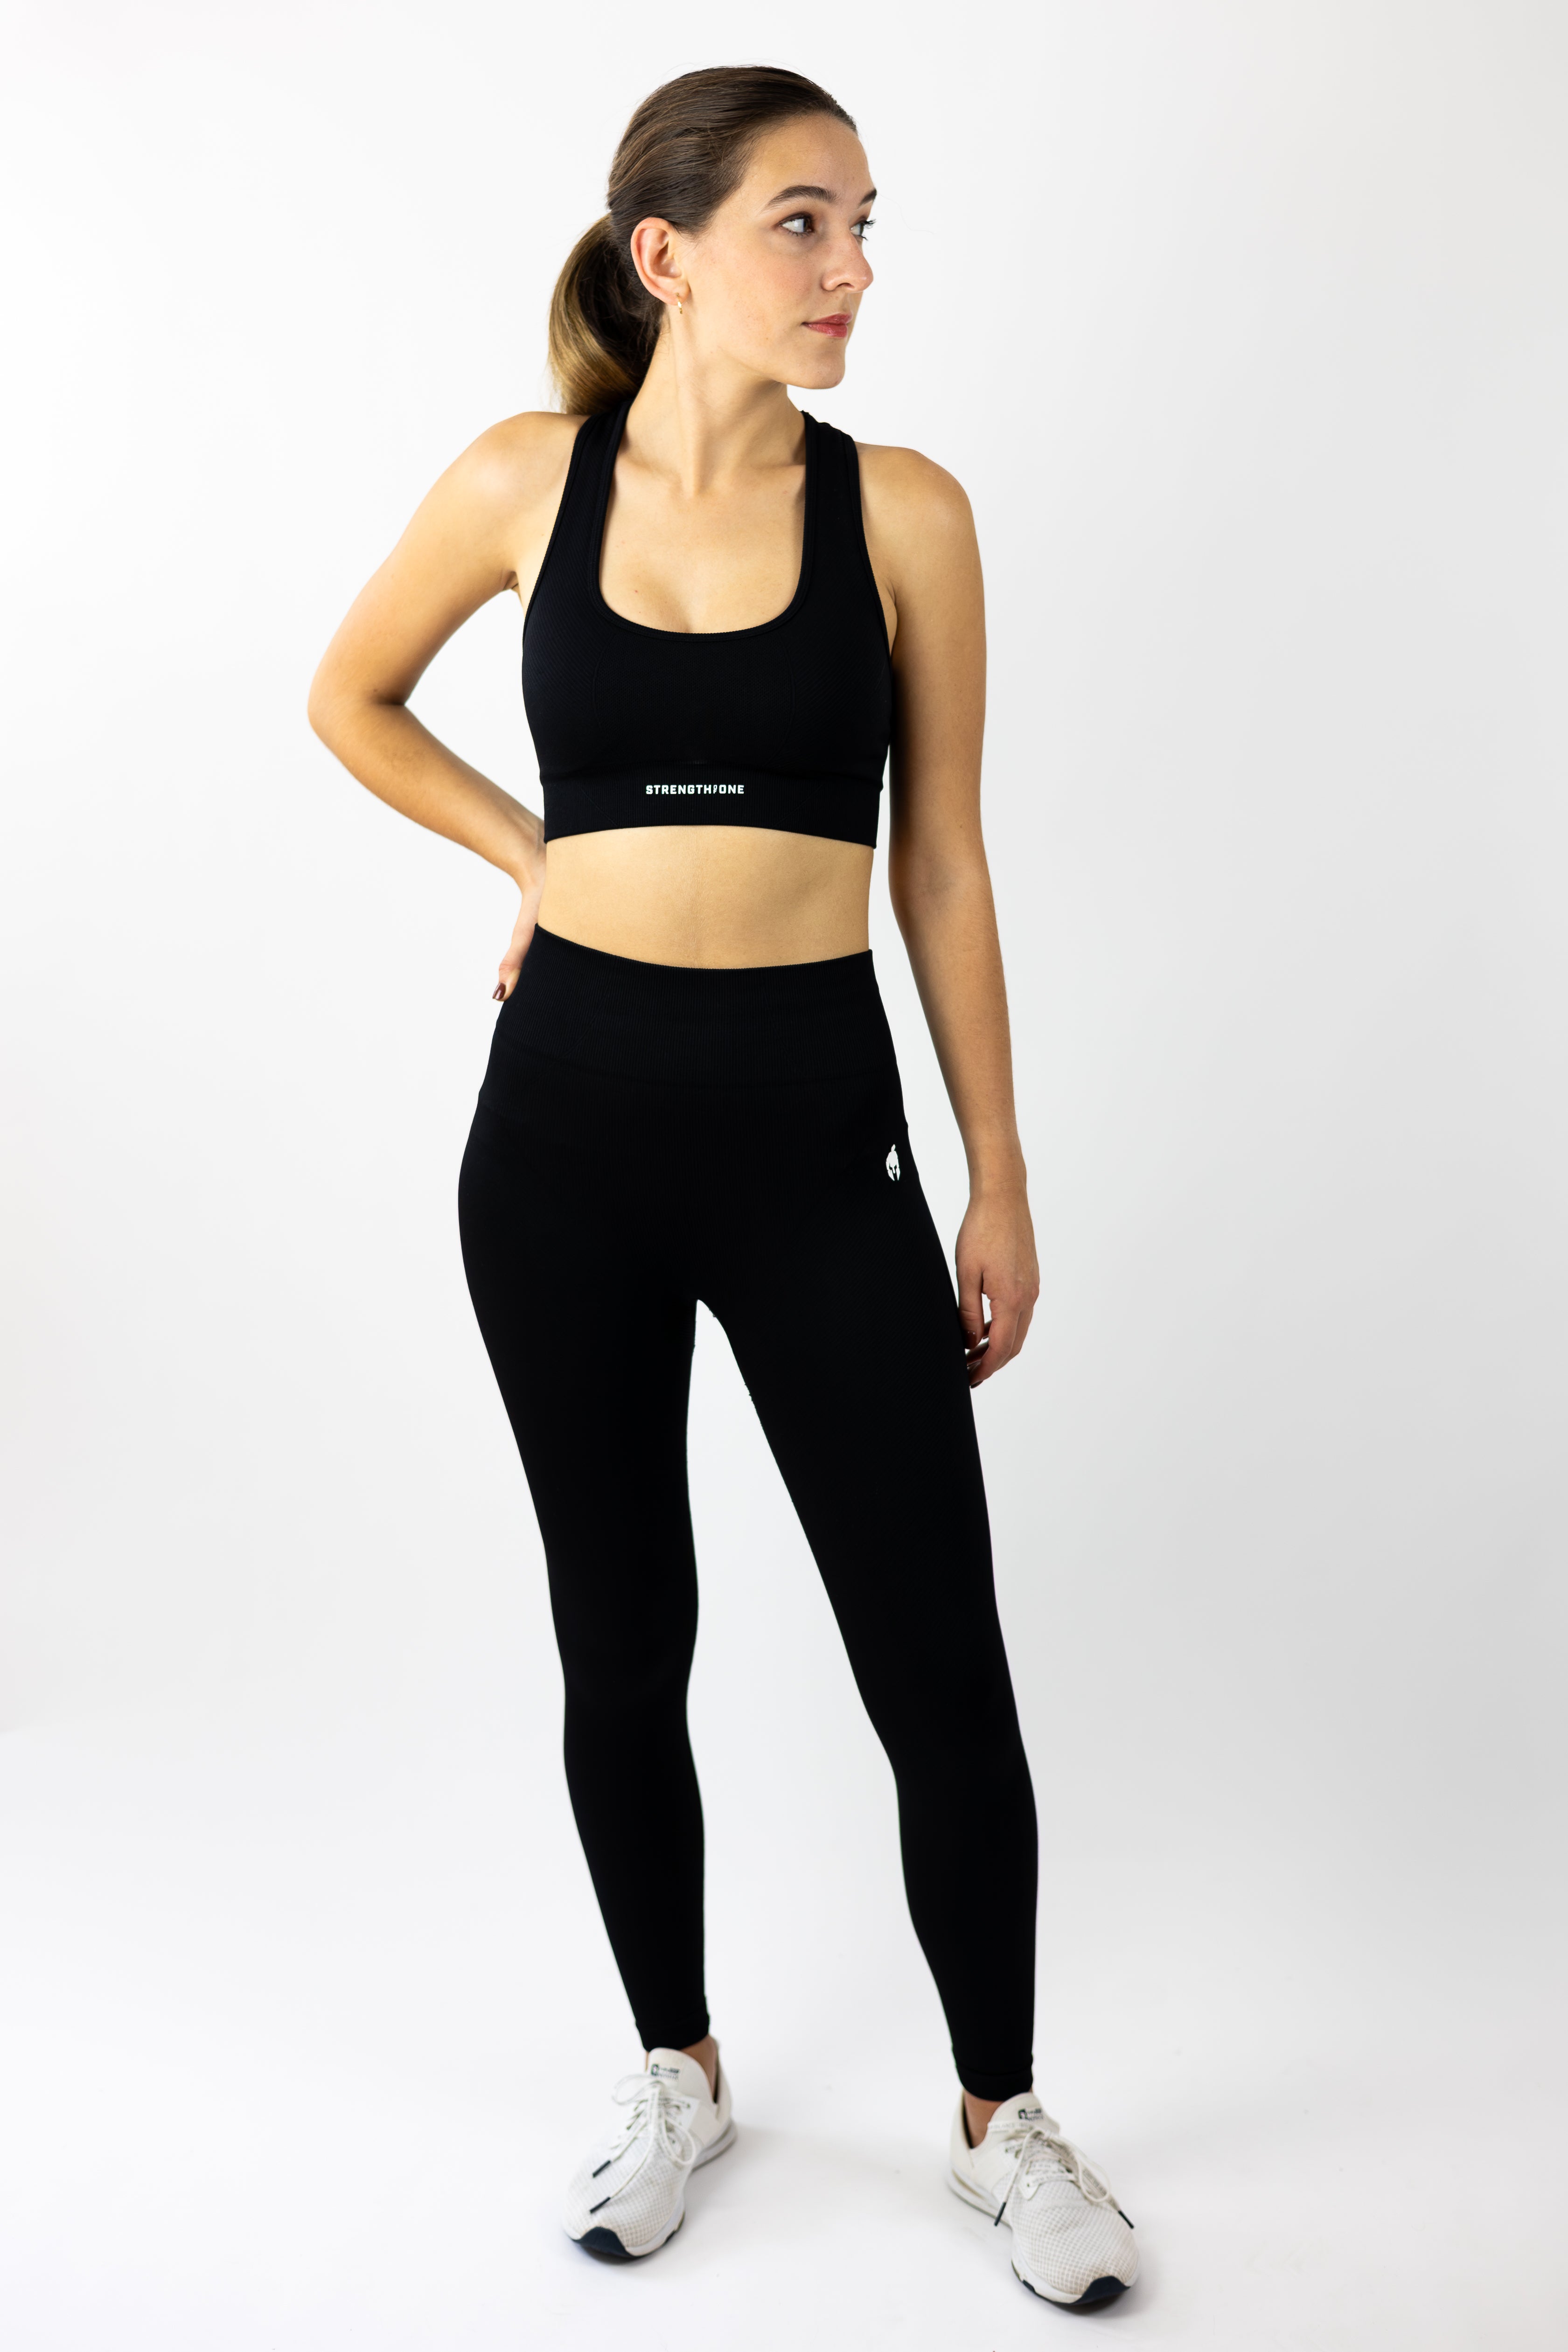 woman modeling Strength of One black yoga pants and sports bra seamless set